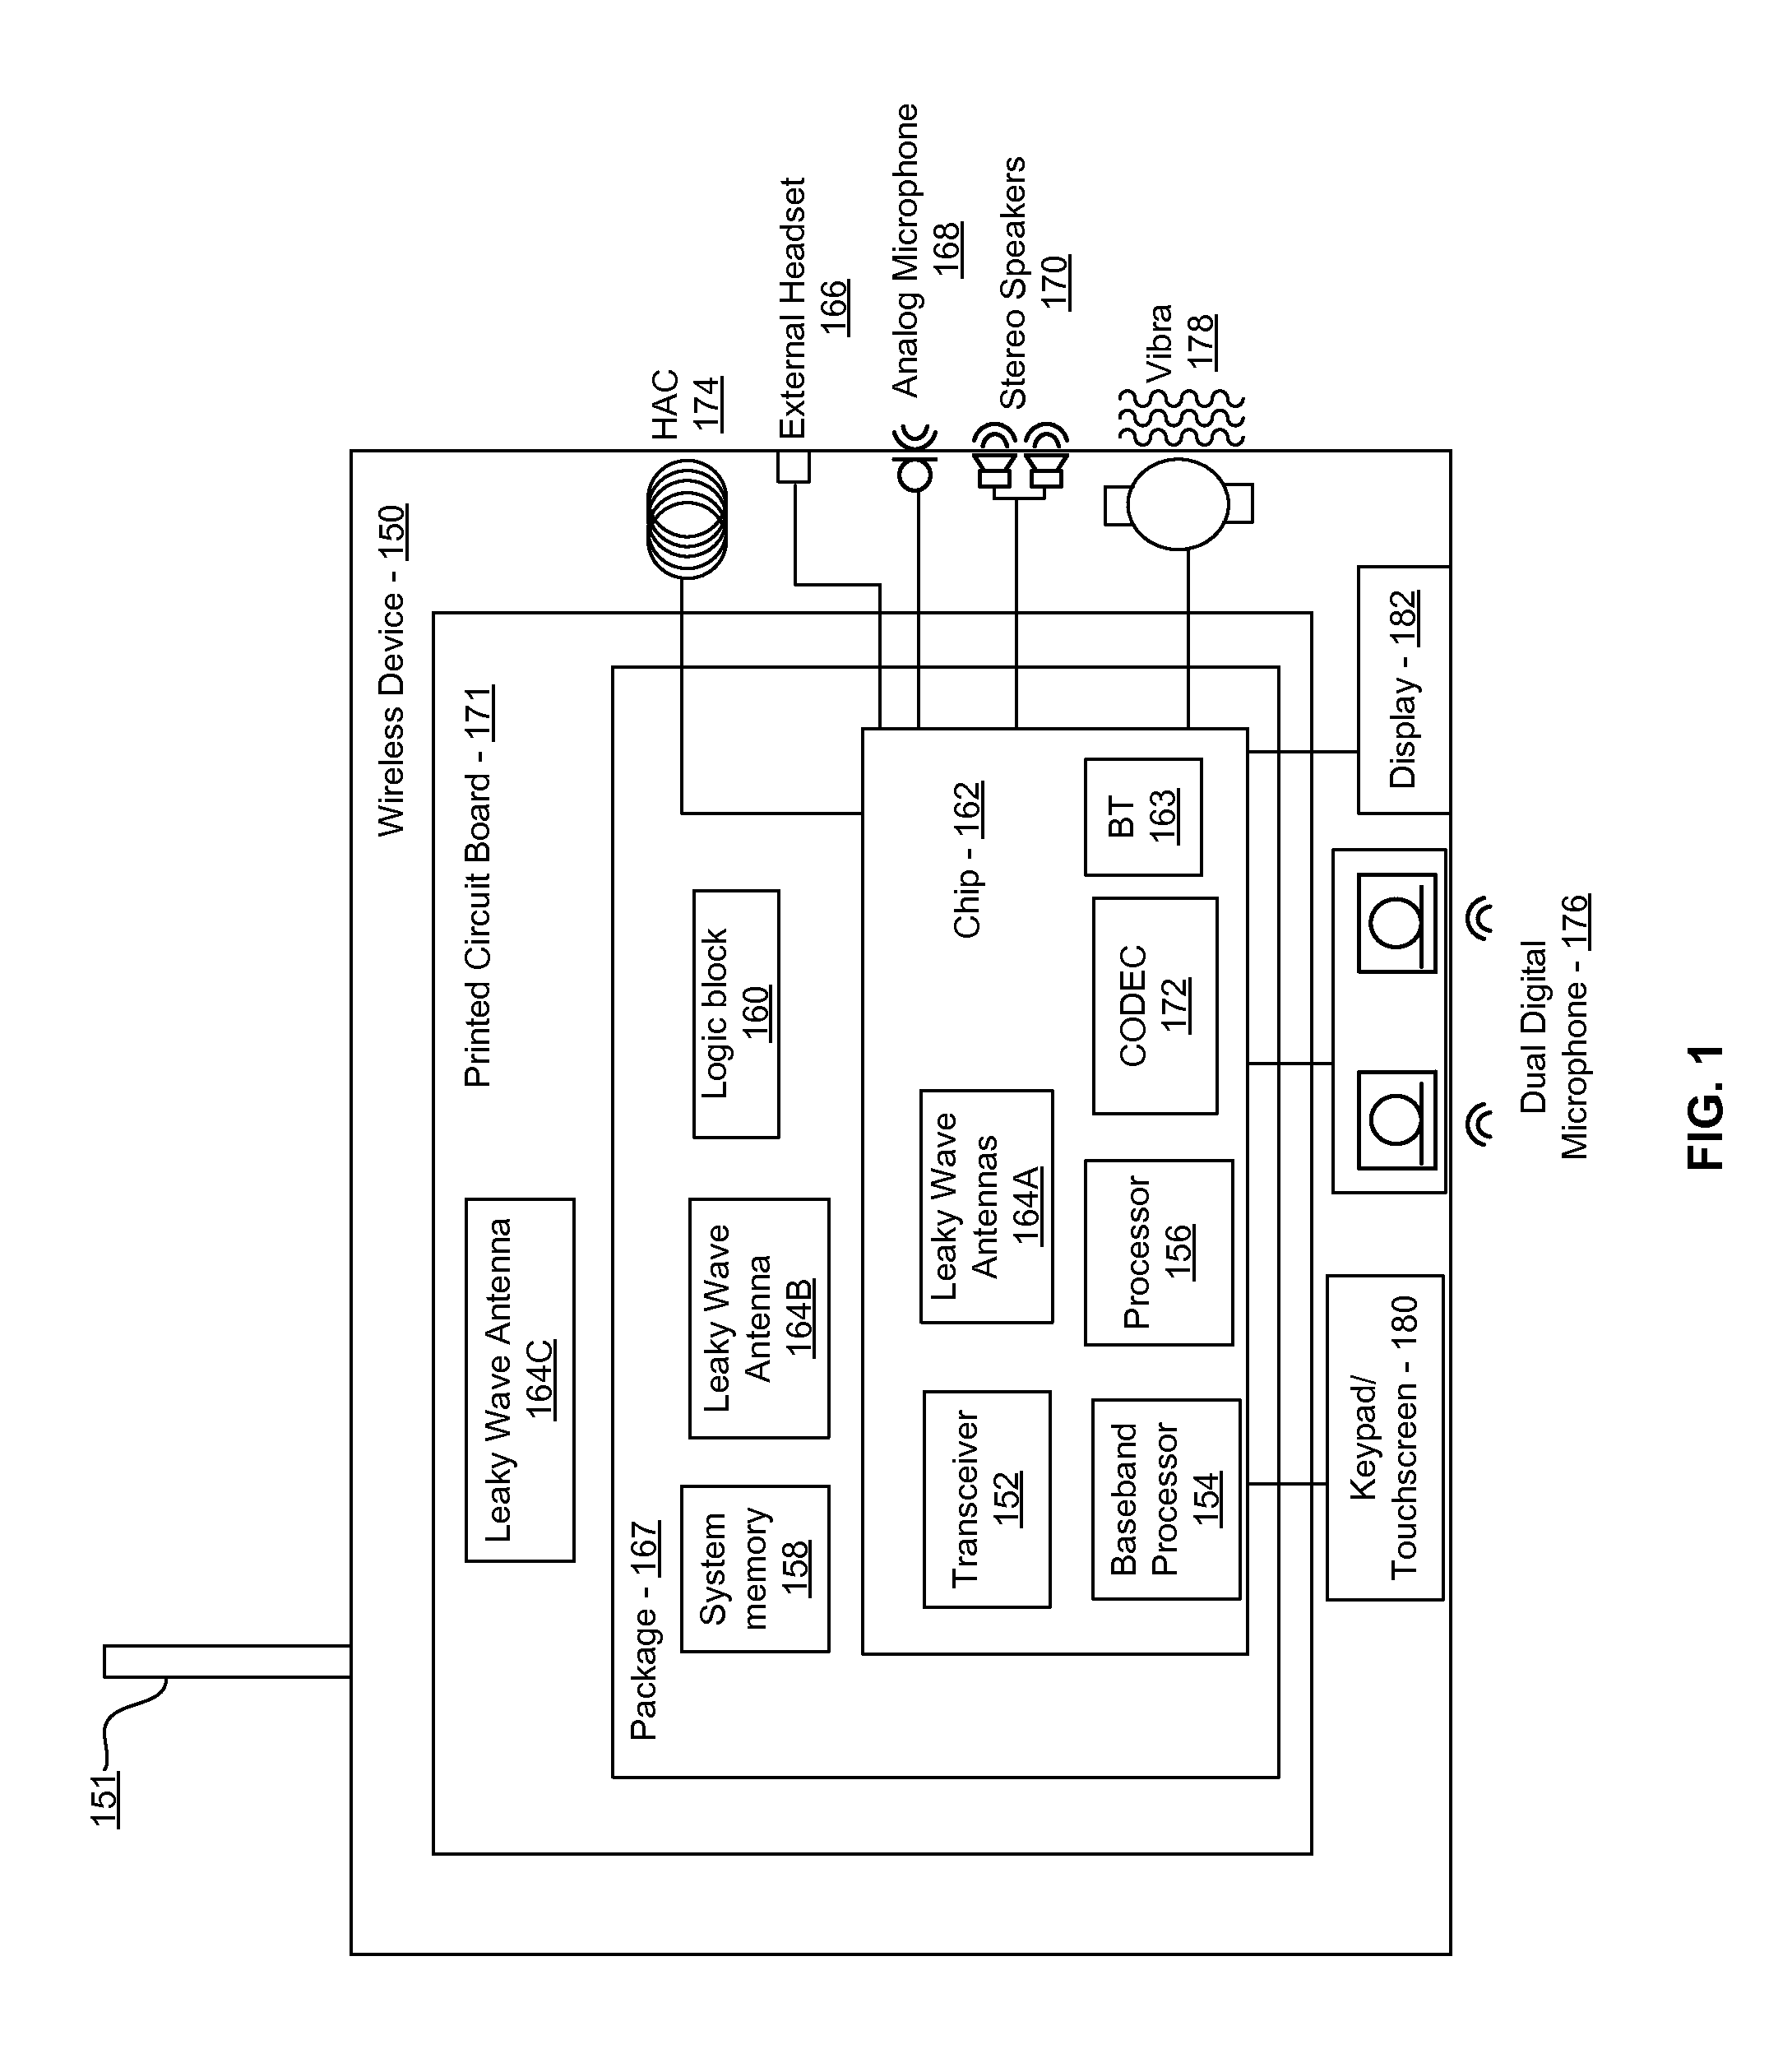 Method and system for an integrated leaky wave antenna-based transmitter and on-chip power distribution